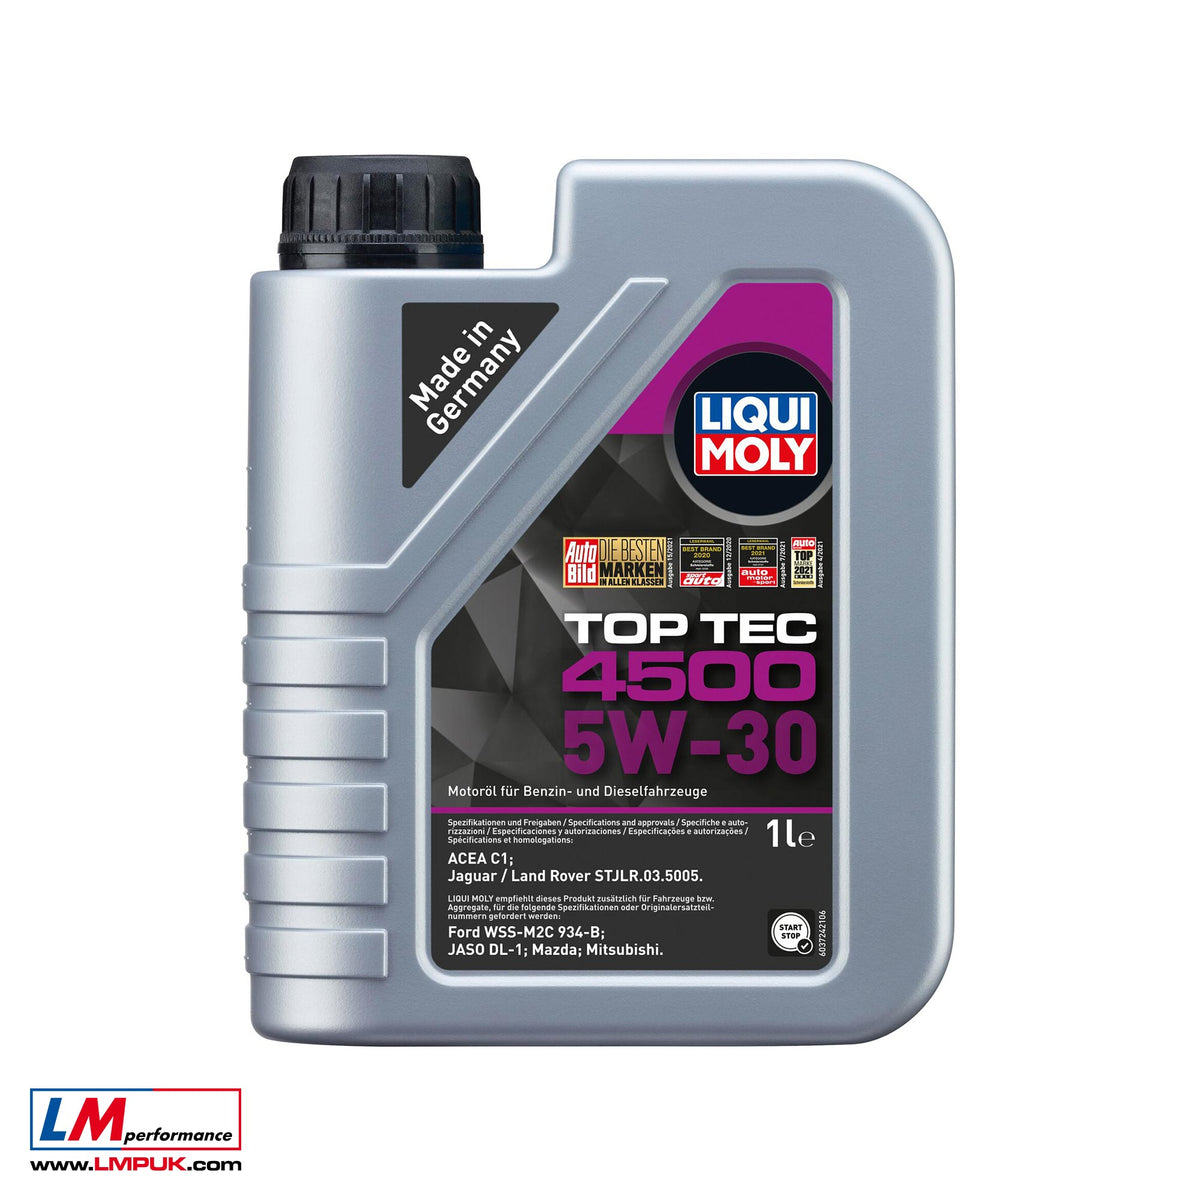 Top Tec 4500 5W-30 Engine Oil by LIQUI MOLY – LM Performance